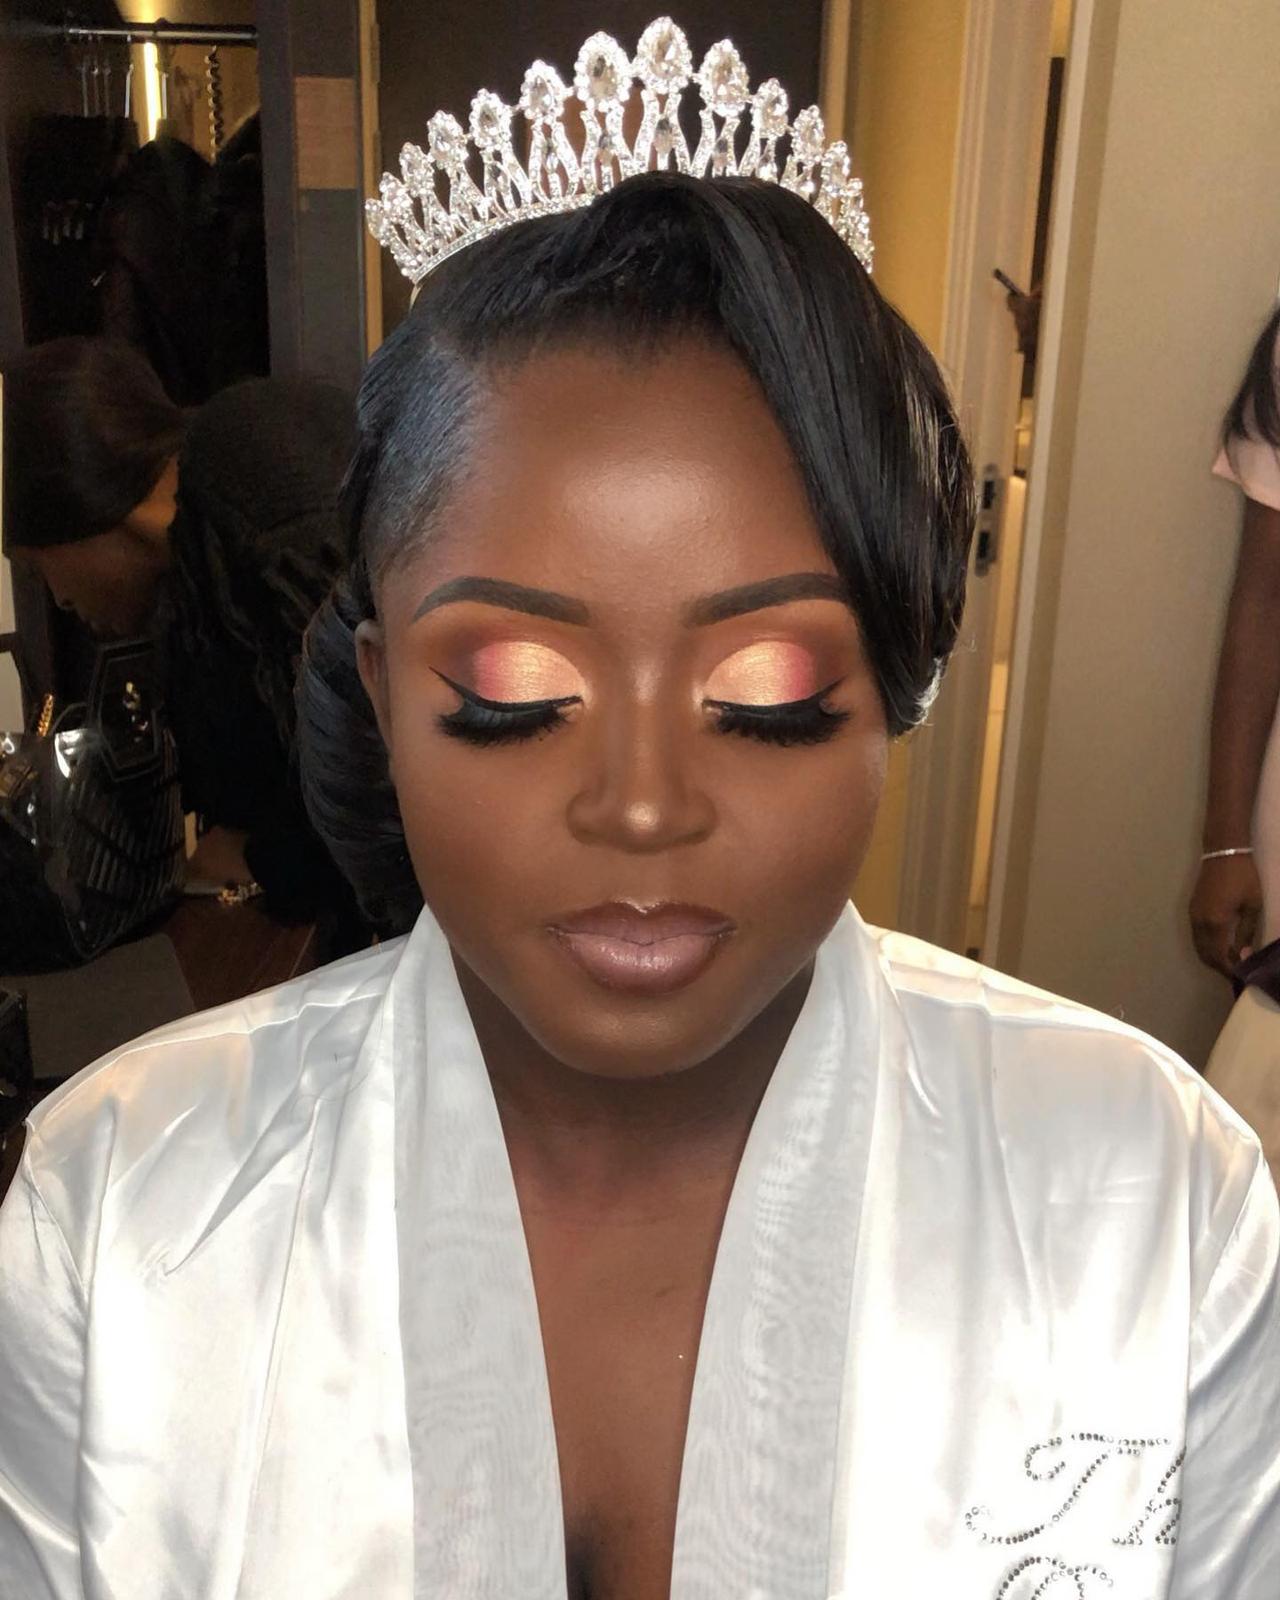 28 Black Makeup Artists & Hair Stylists - hitched.co.uk